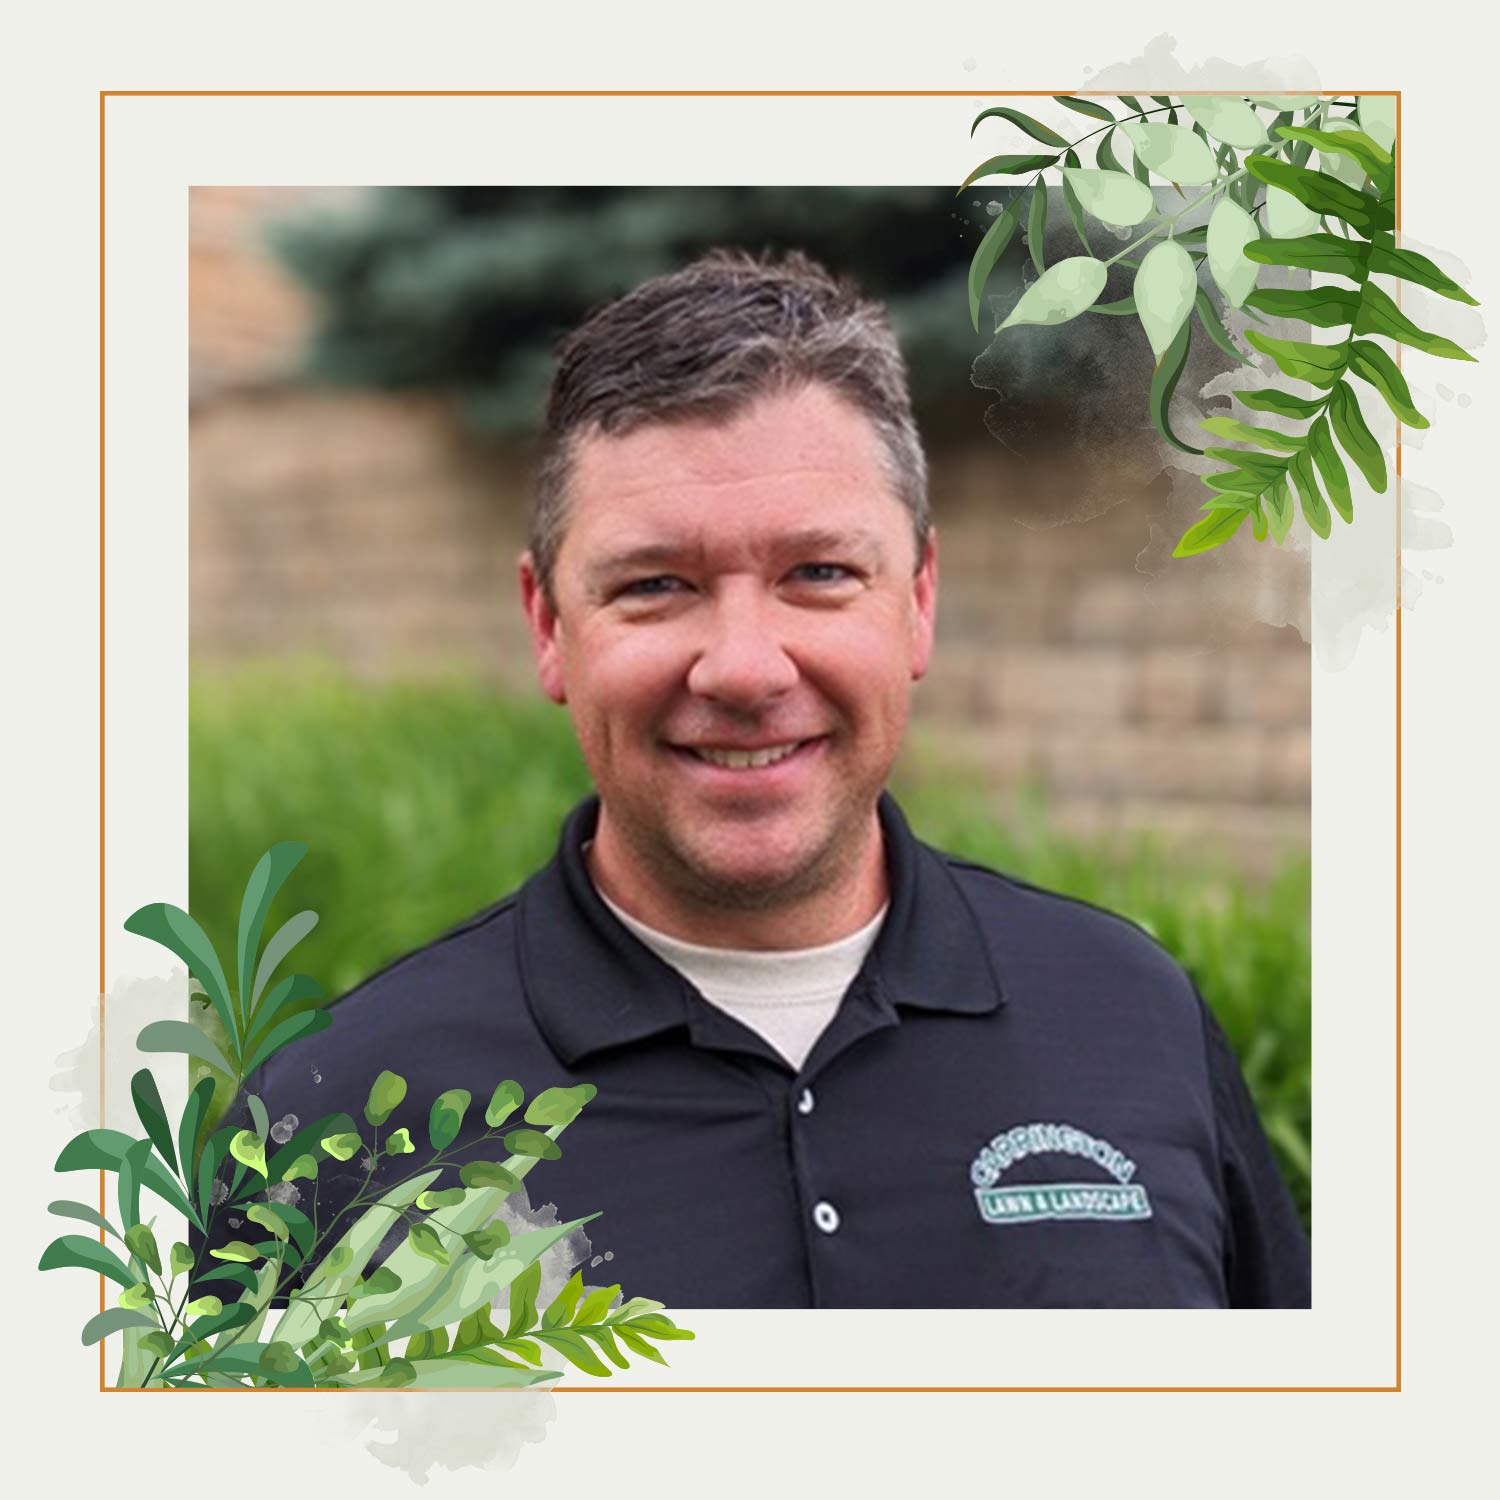 Mike Wenkman of Carrington Lawn and Landscape Middleton, WI.